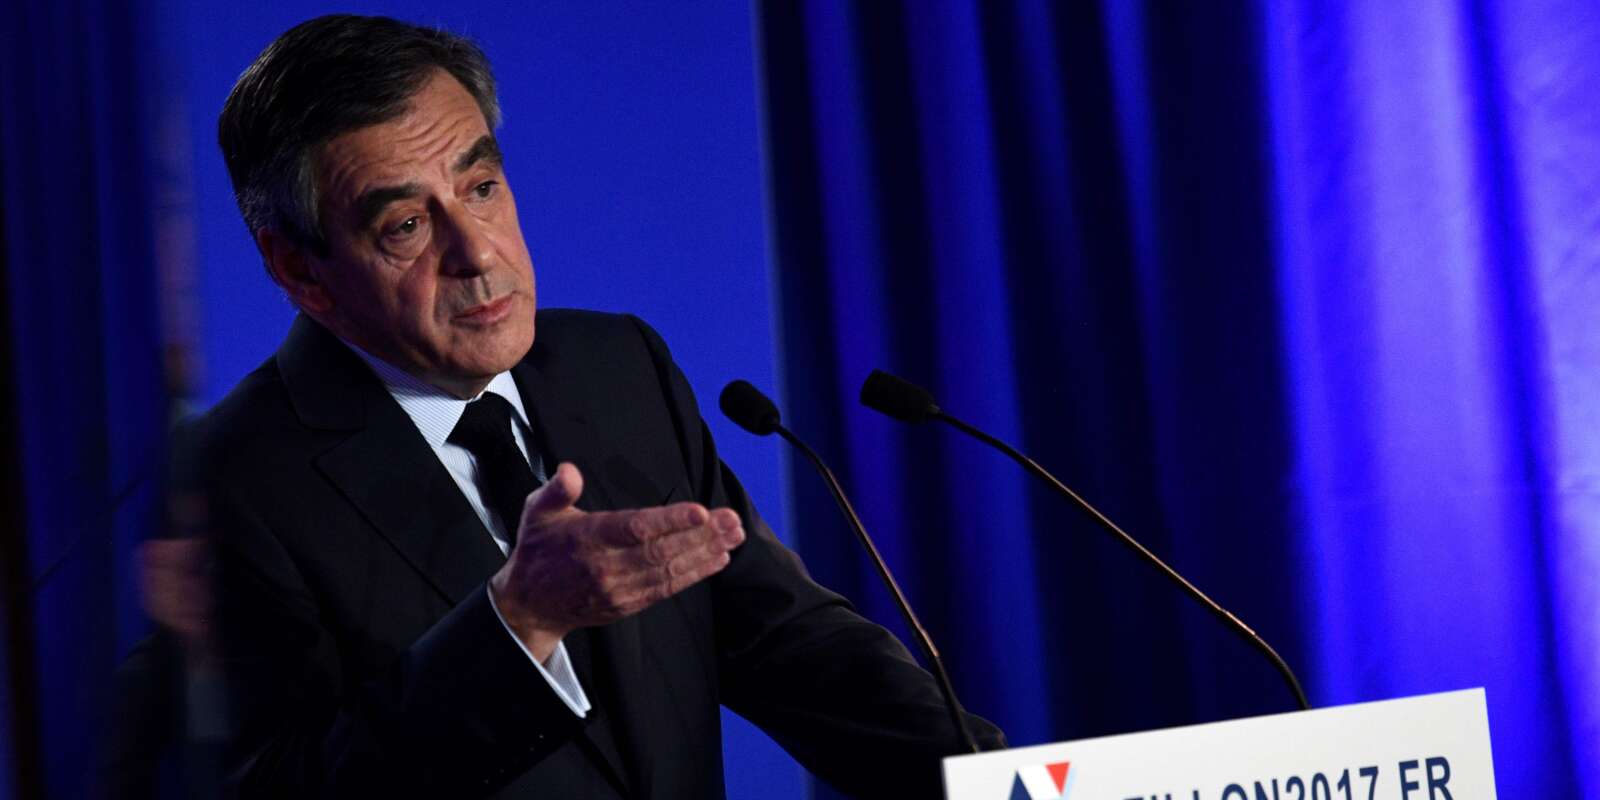 French presidential election candidate for the right-wing Les Republicains (LR) party Francois Fillon gives a press conference focused on 